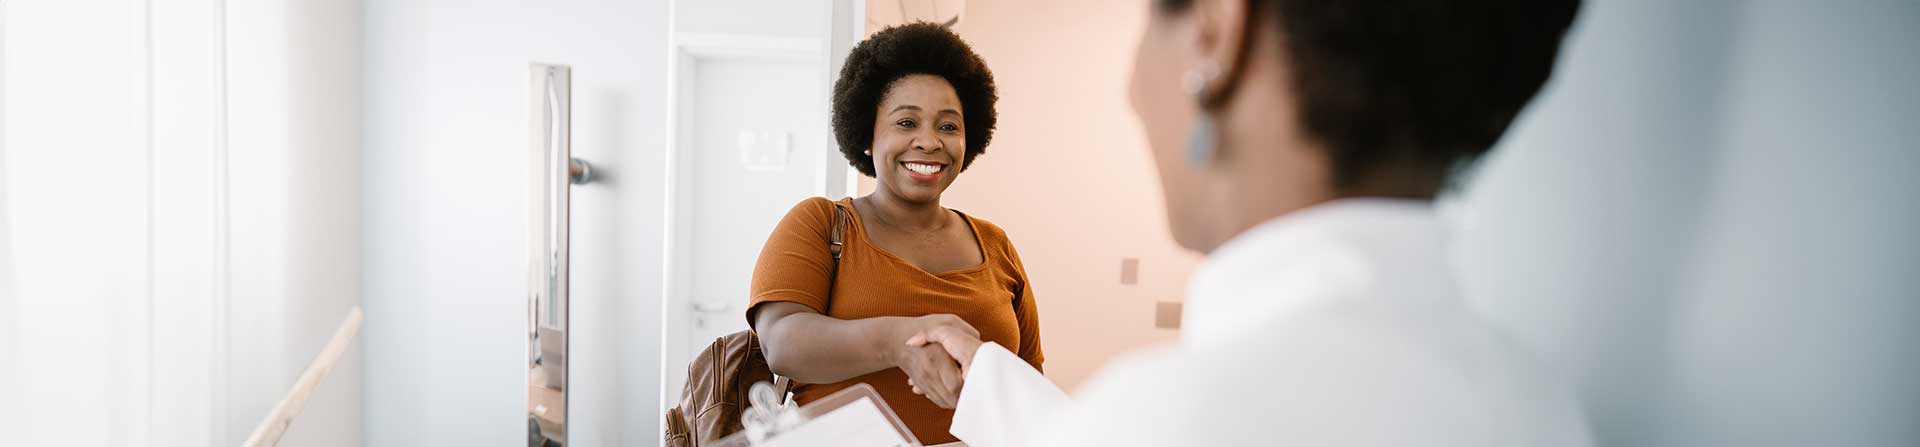 Relieved patient shakes hands with provider